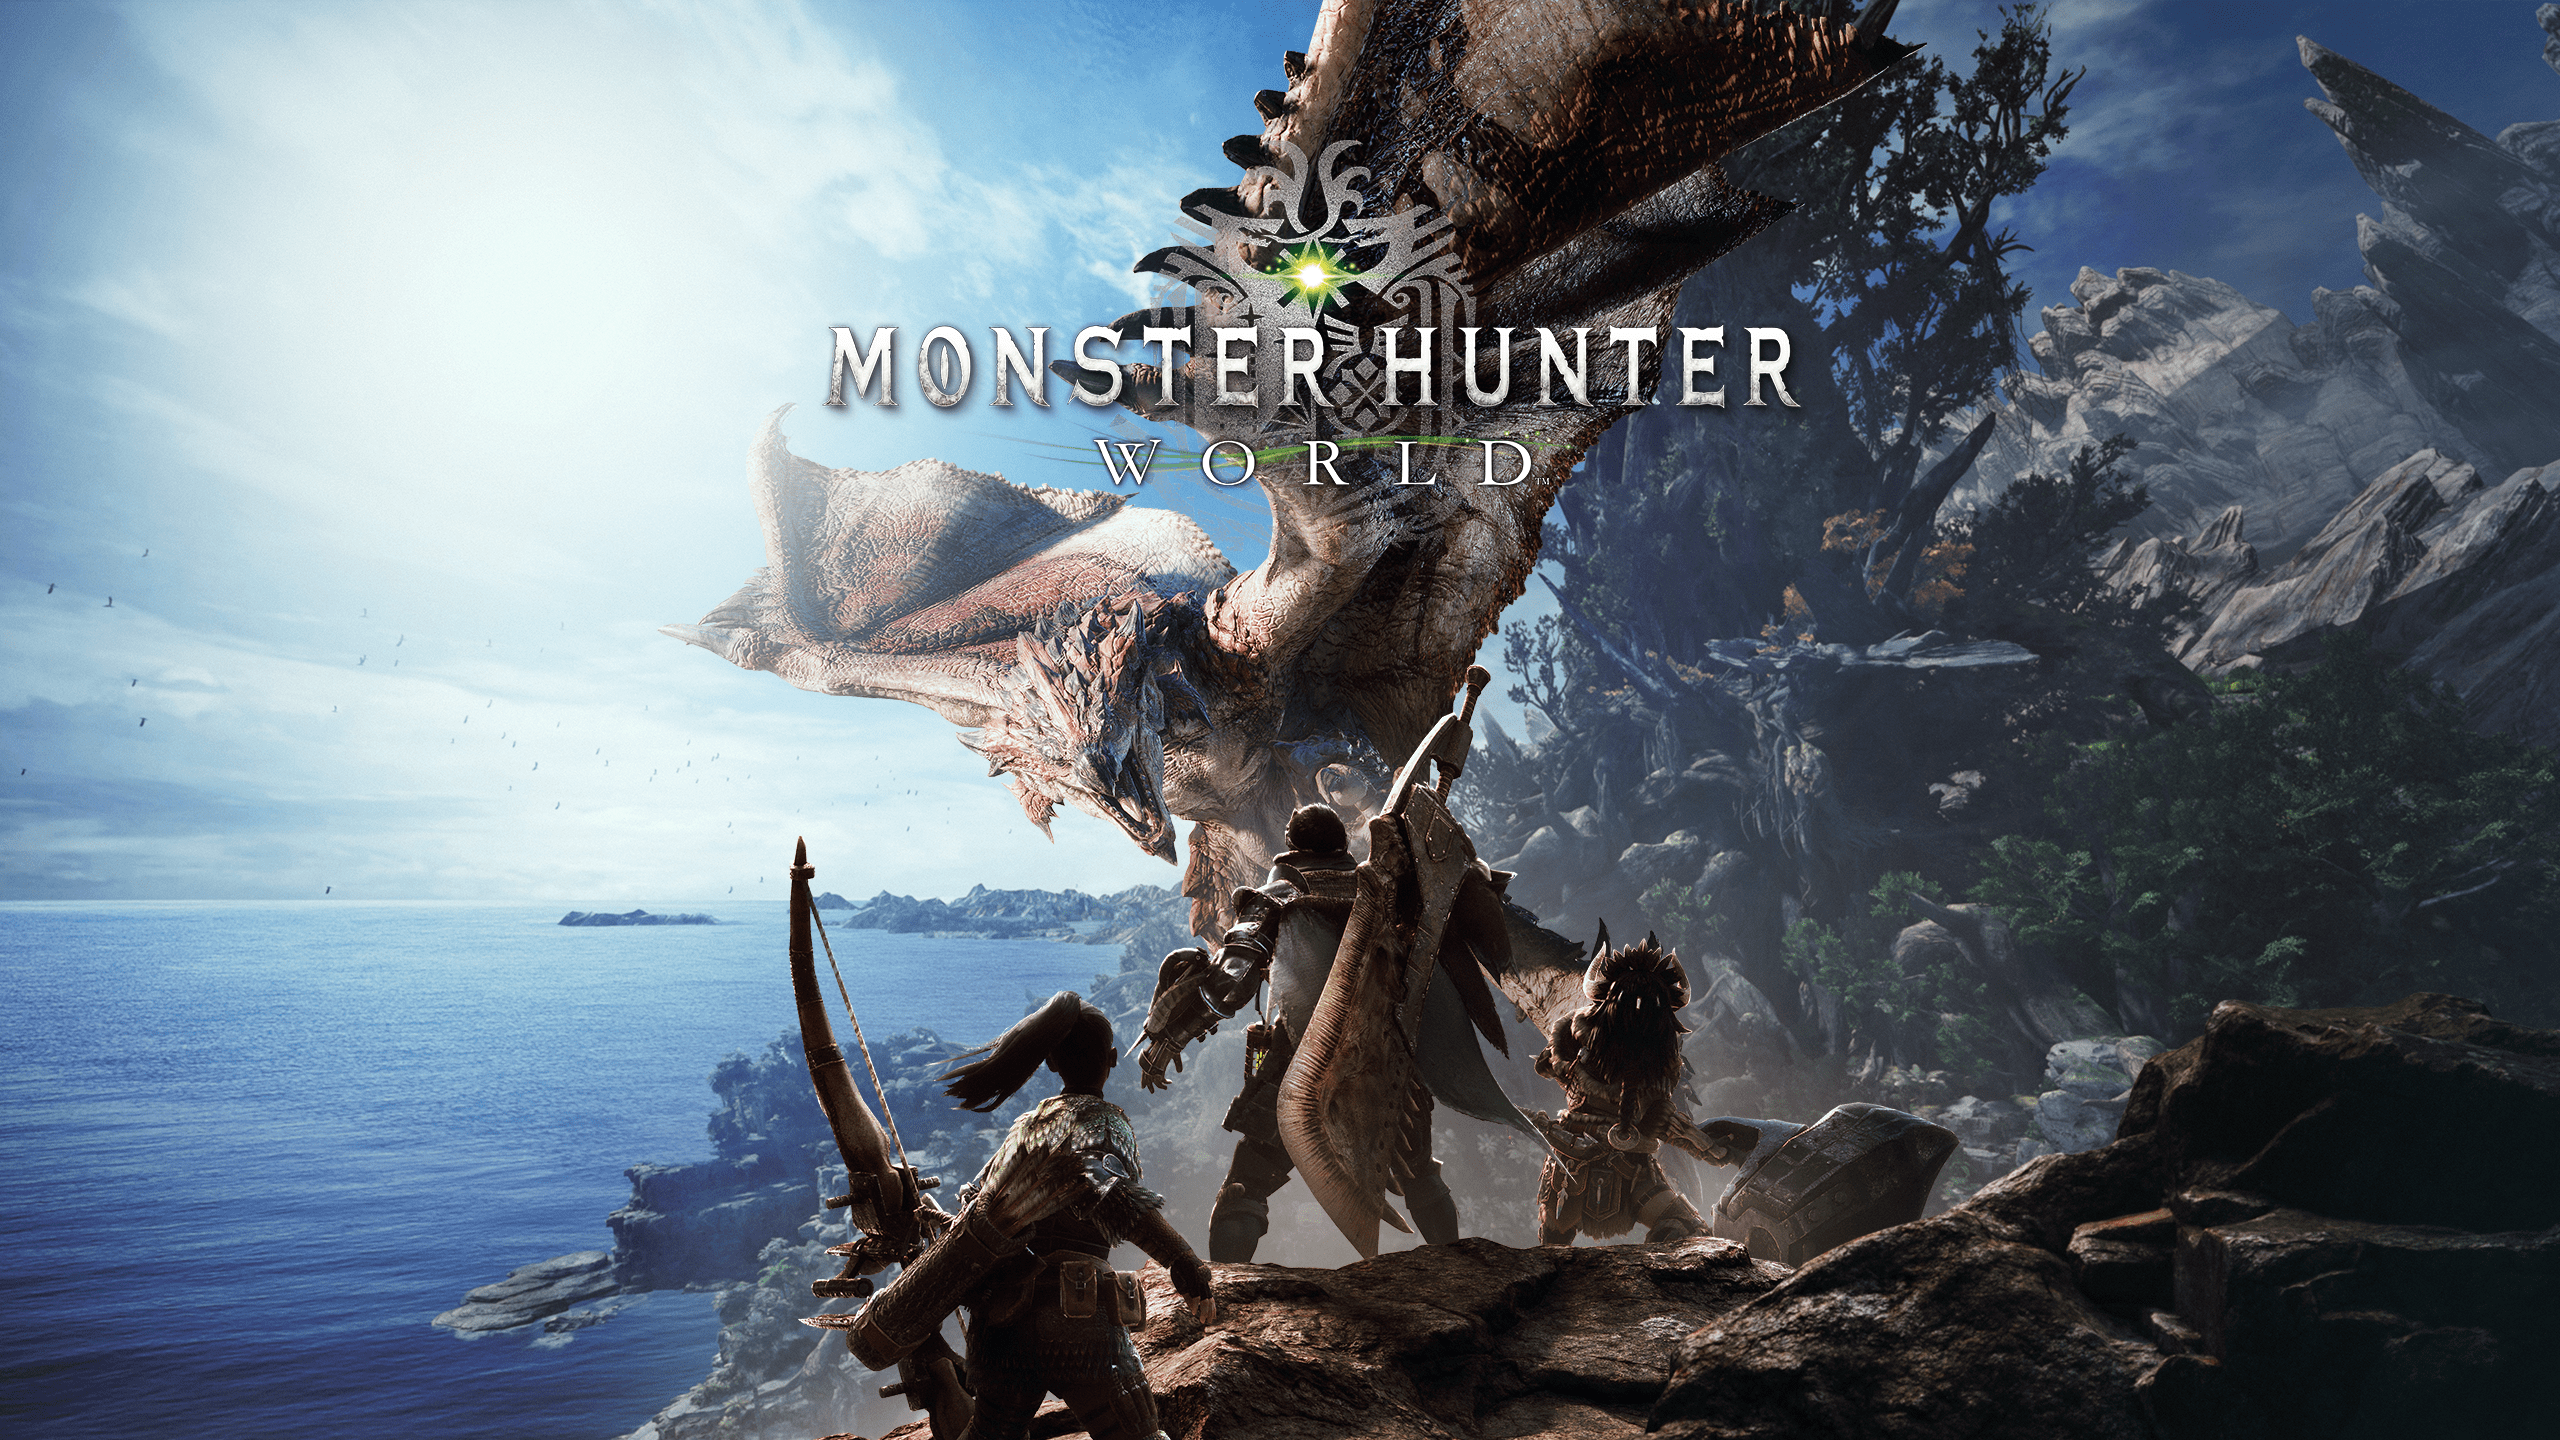 There’s now a free trial of Monster Hunter: World on PlayStation 4